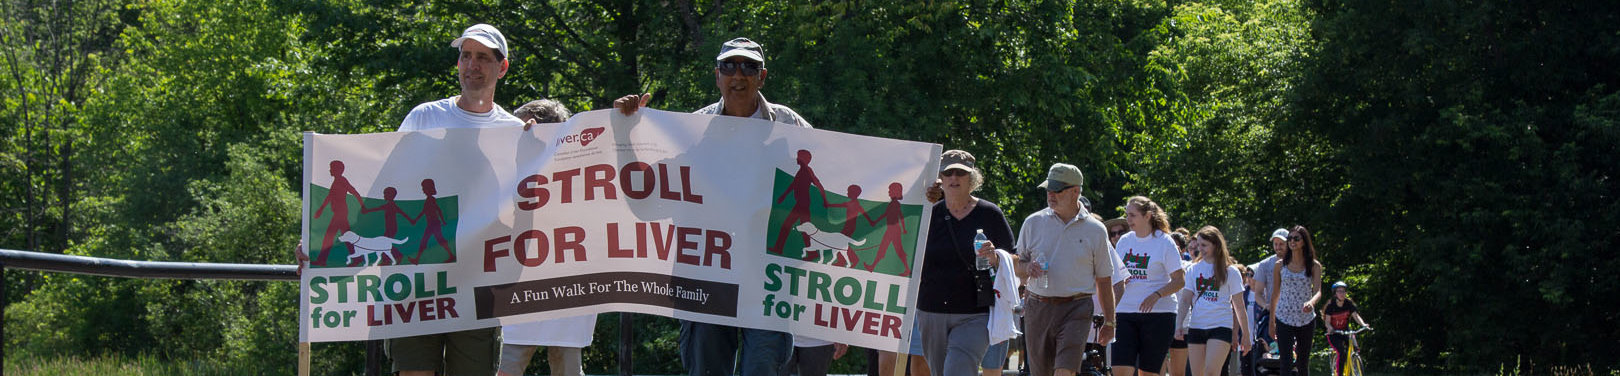 A lineup of Stroll for Liver participants walk holding a large Stroll for Liver banner